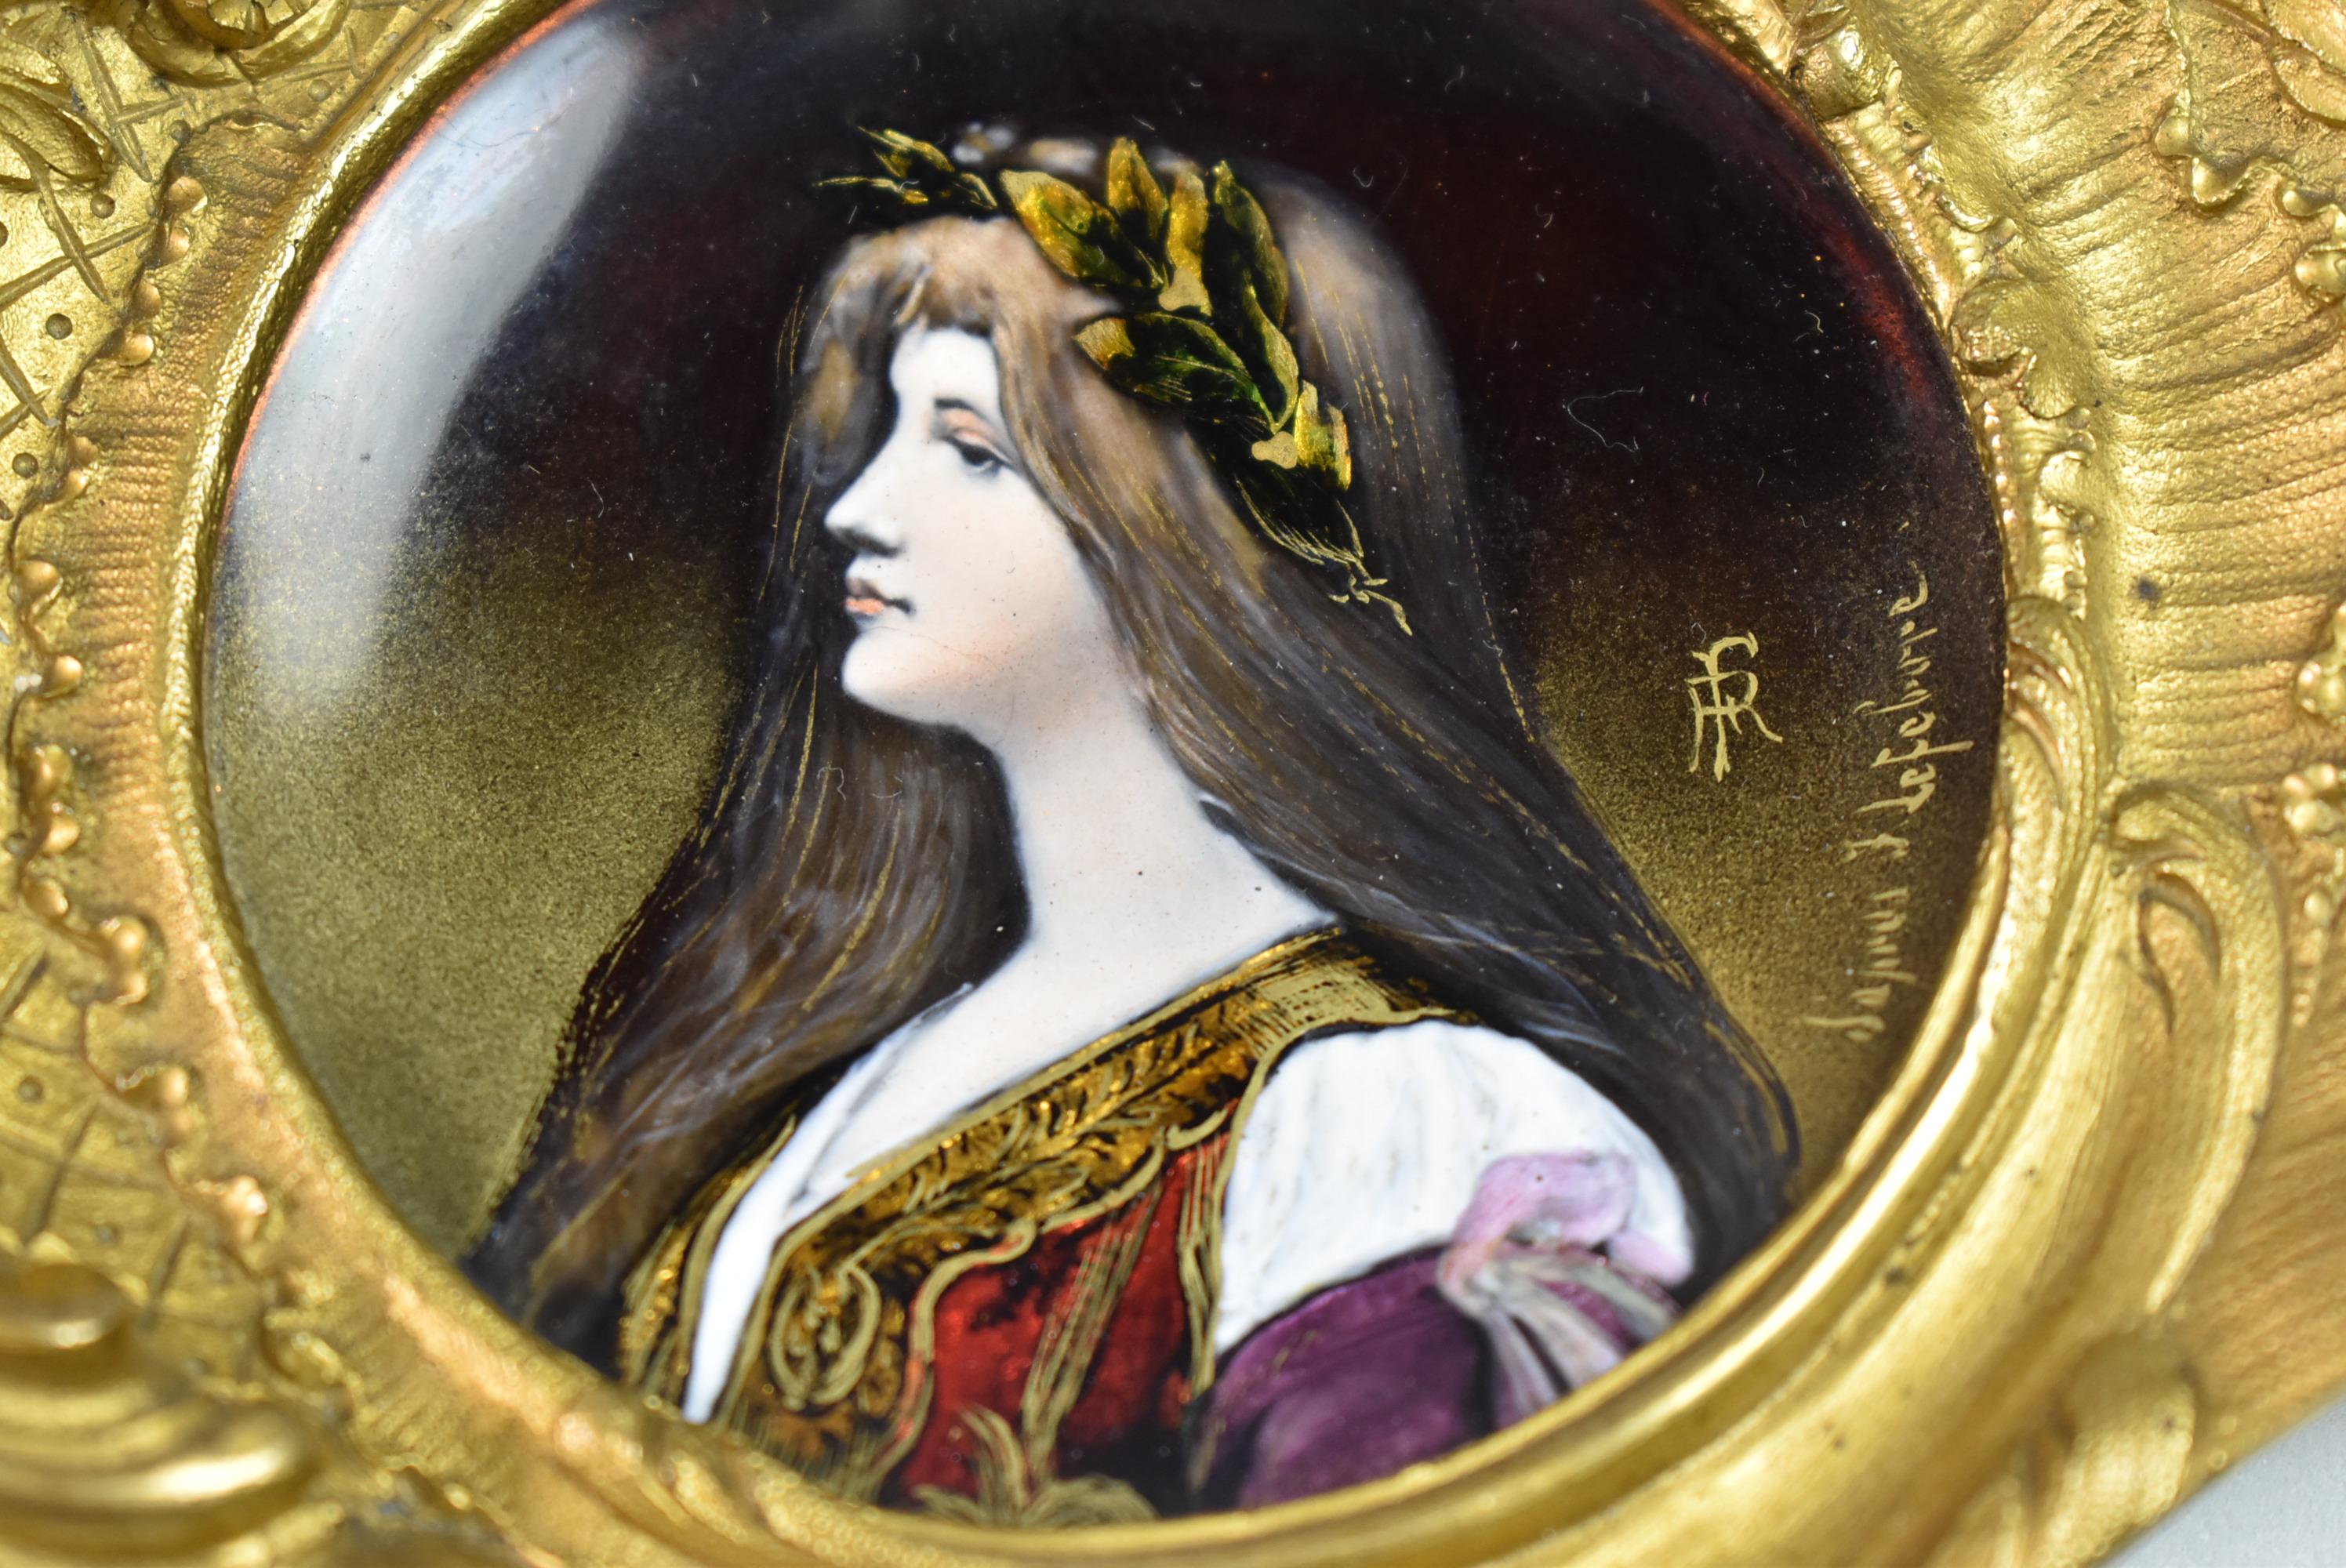 Antique Art Nouveau bronze jewelry pin tray with miniature hand painted portrait. Great details of a young lady. Signed and monogrammed. Ornate frame with floral details. Measures: 5.5